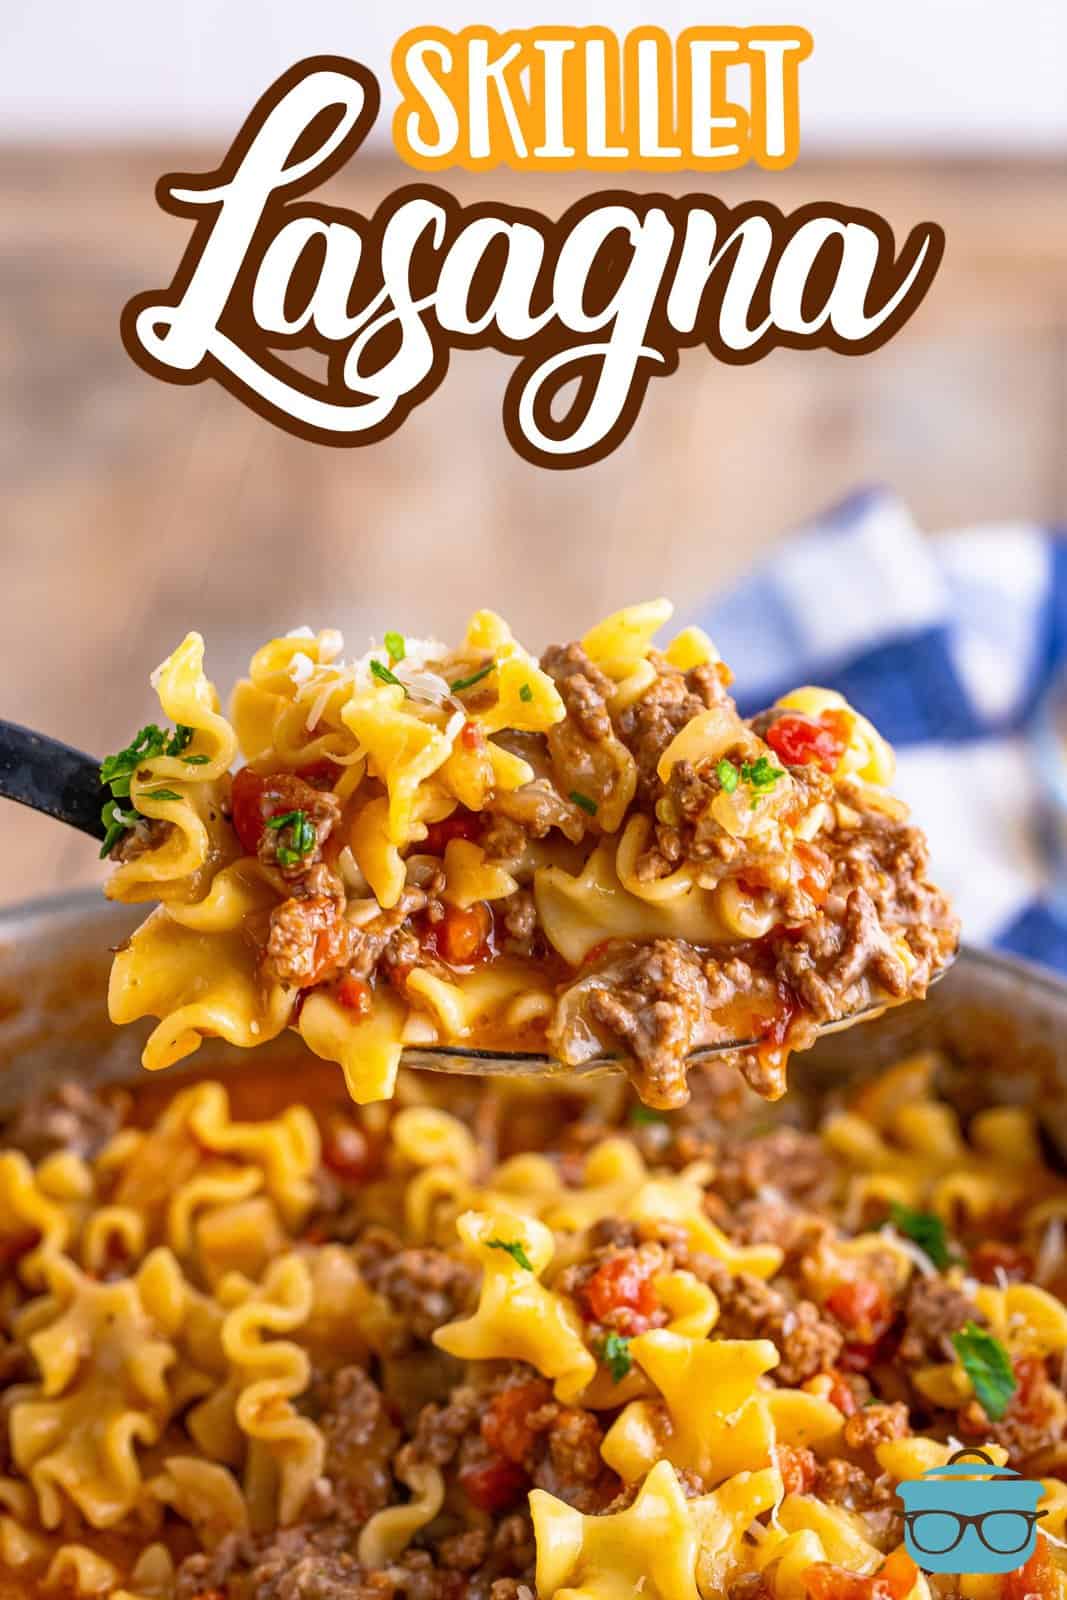 a spoon scooping up a serving of skillet lasagna and holding it over the pan.